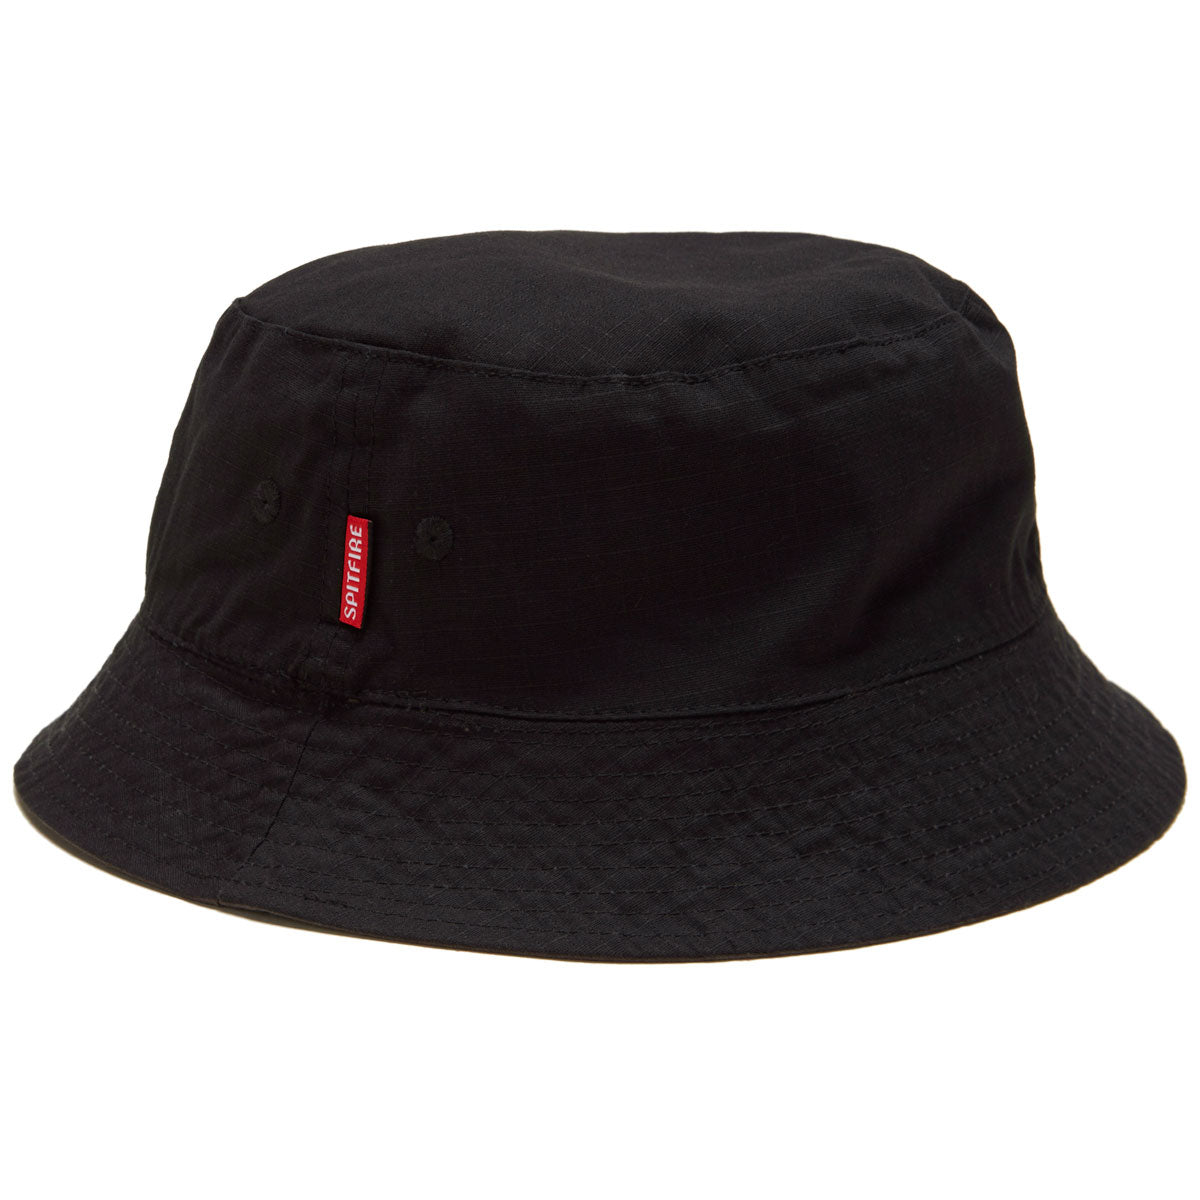 Spitfire Classic 87 Reversible Hat - Charcoal/Black image 4